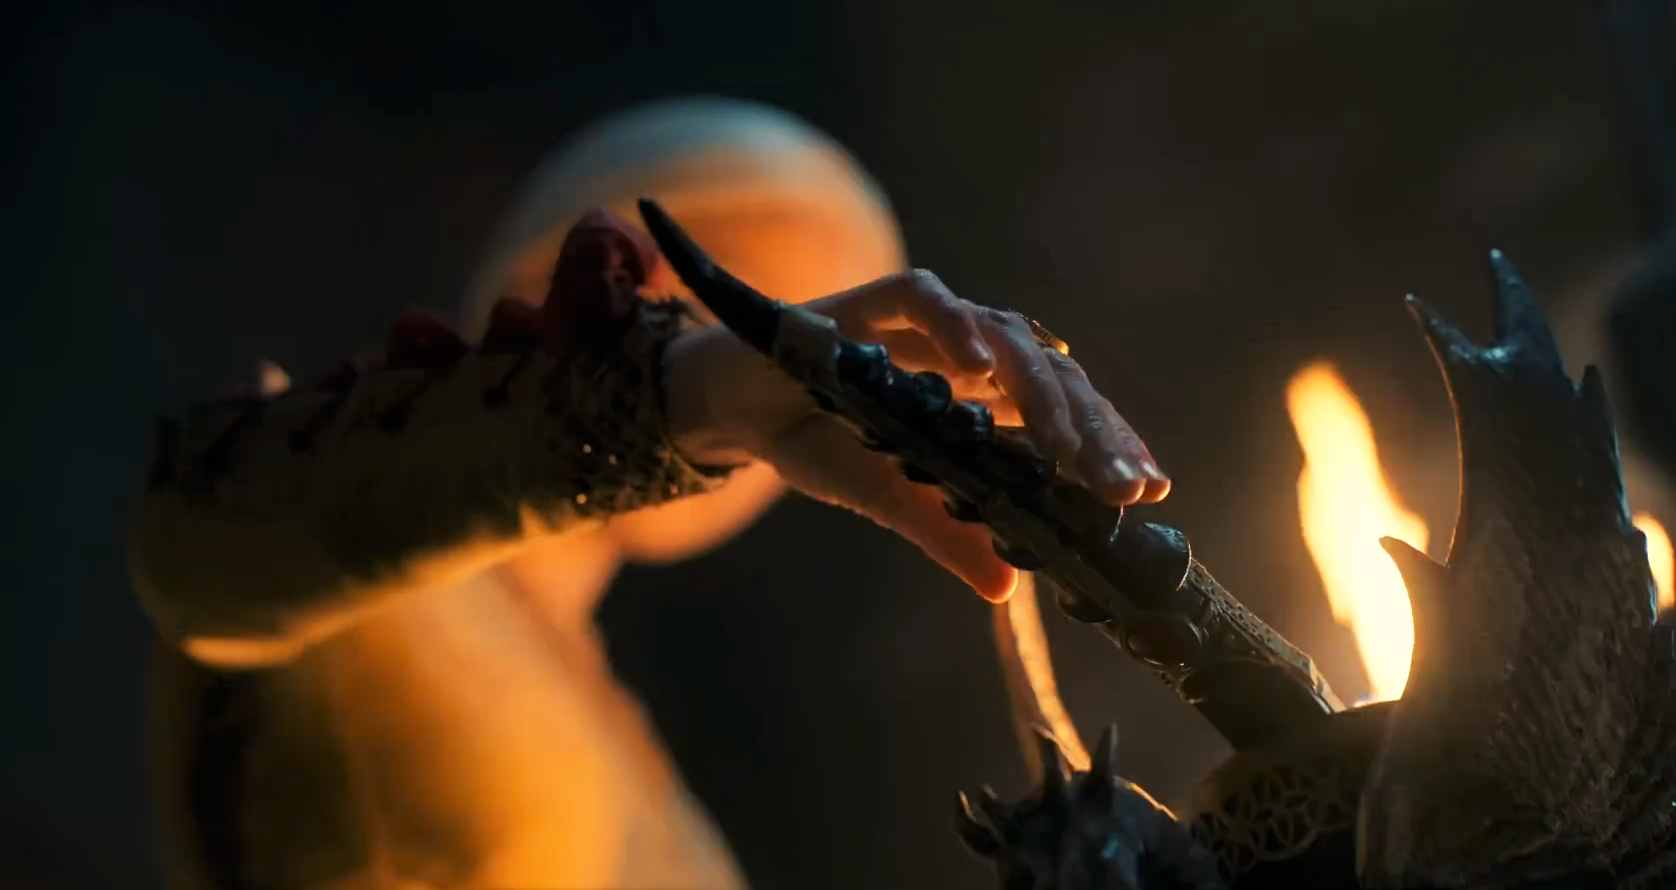 Yes, that's Rhaenyra about to grasp THAT famous Valyrian steel dagger!